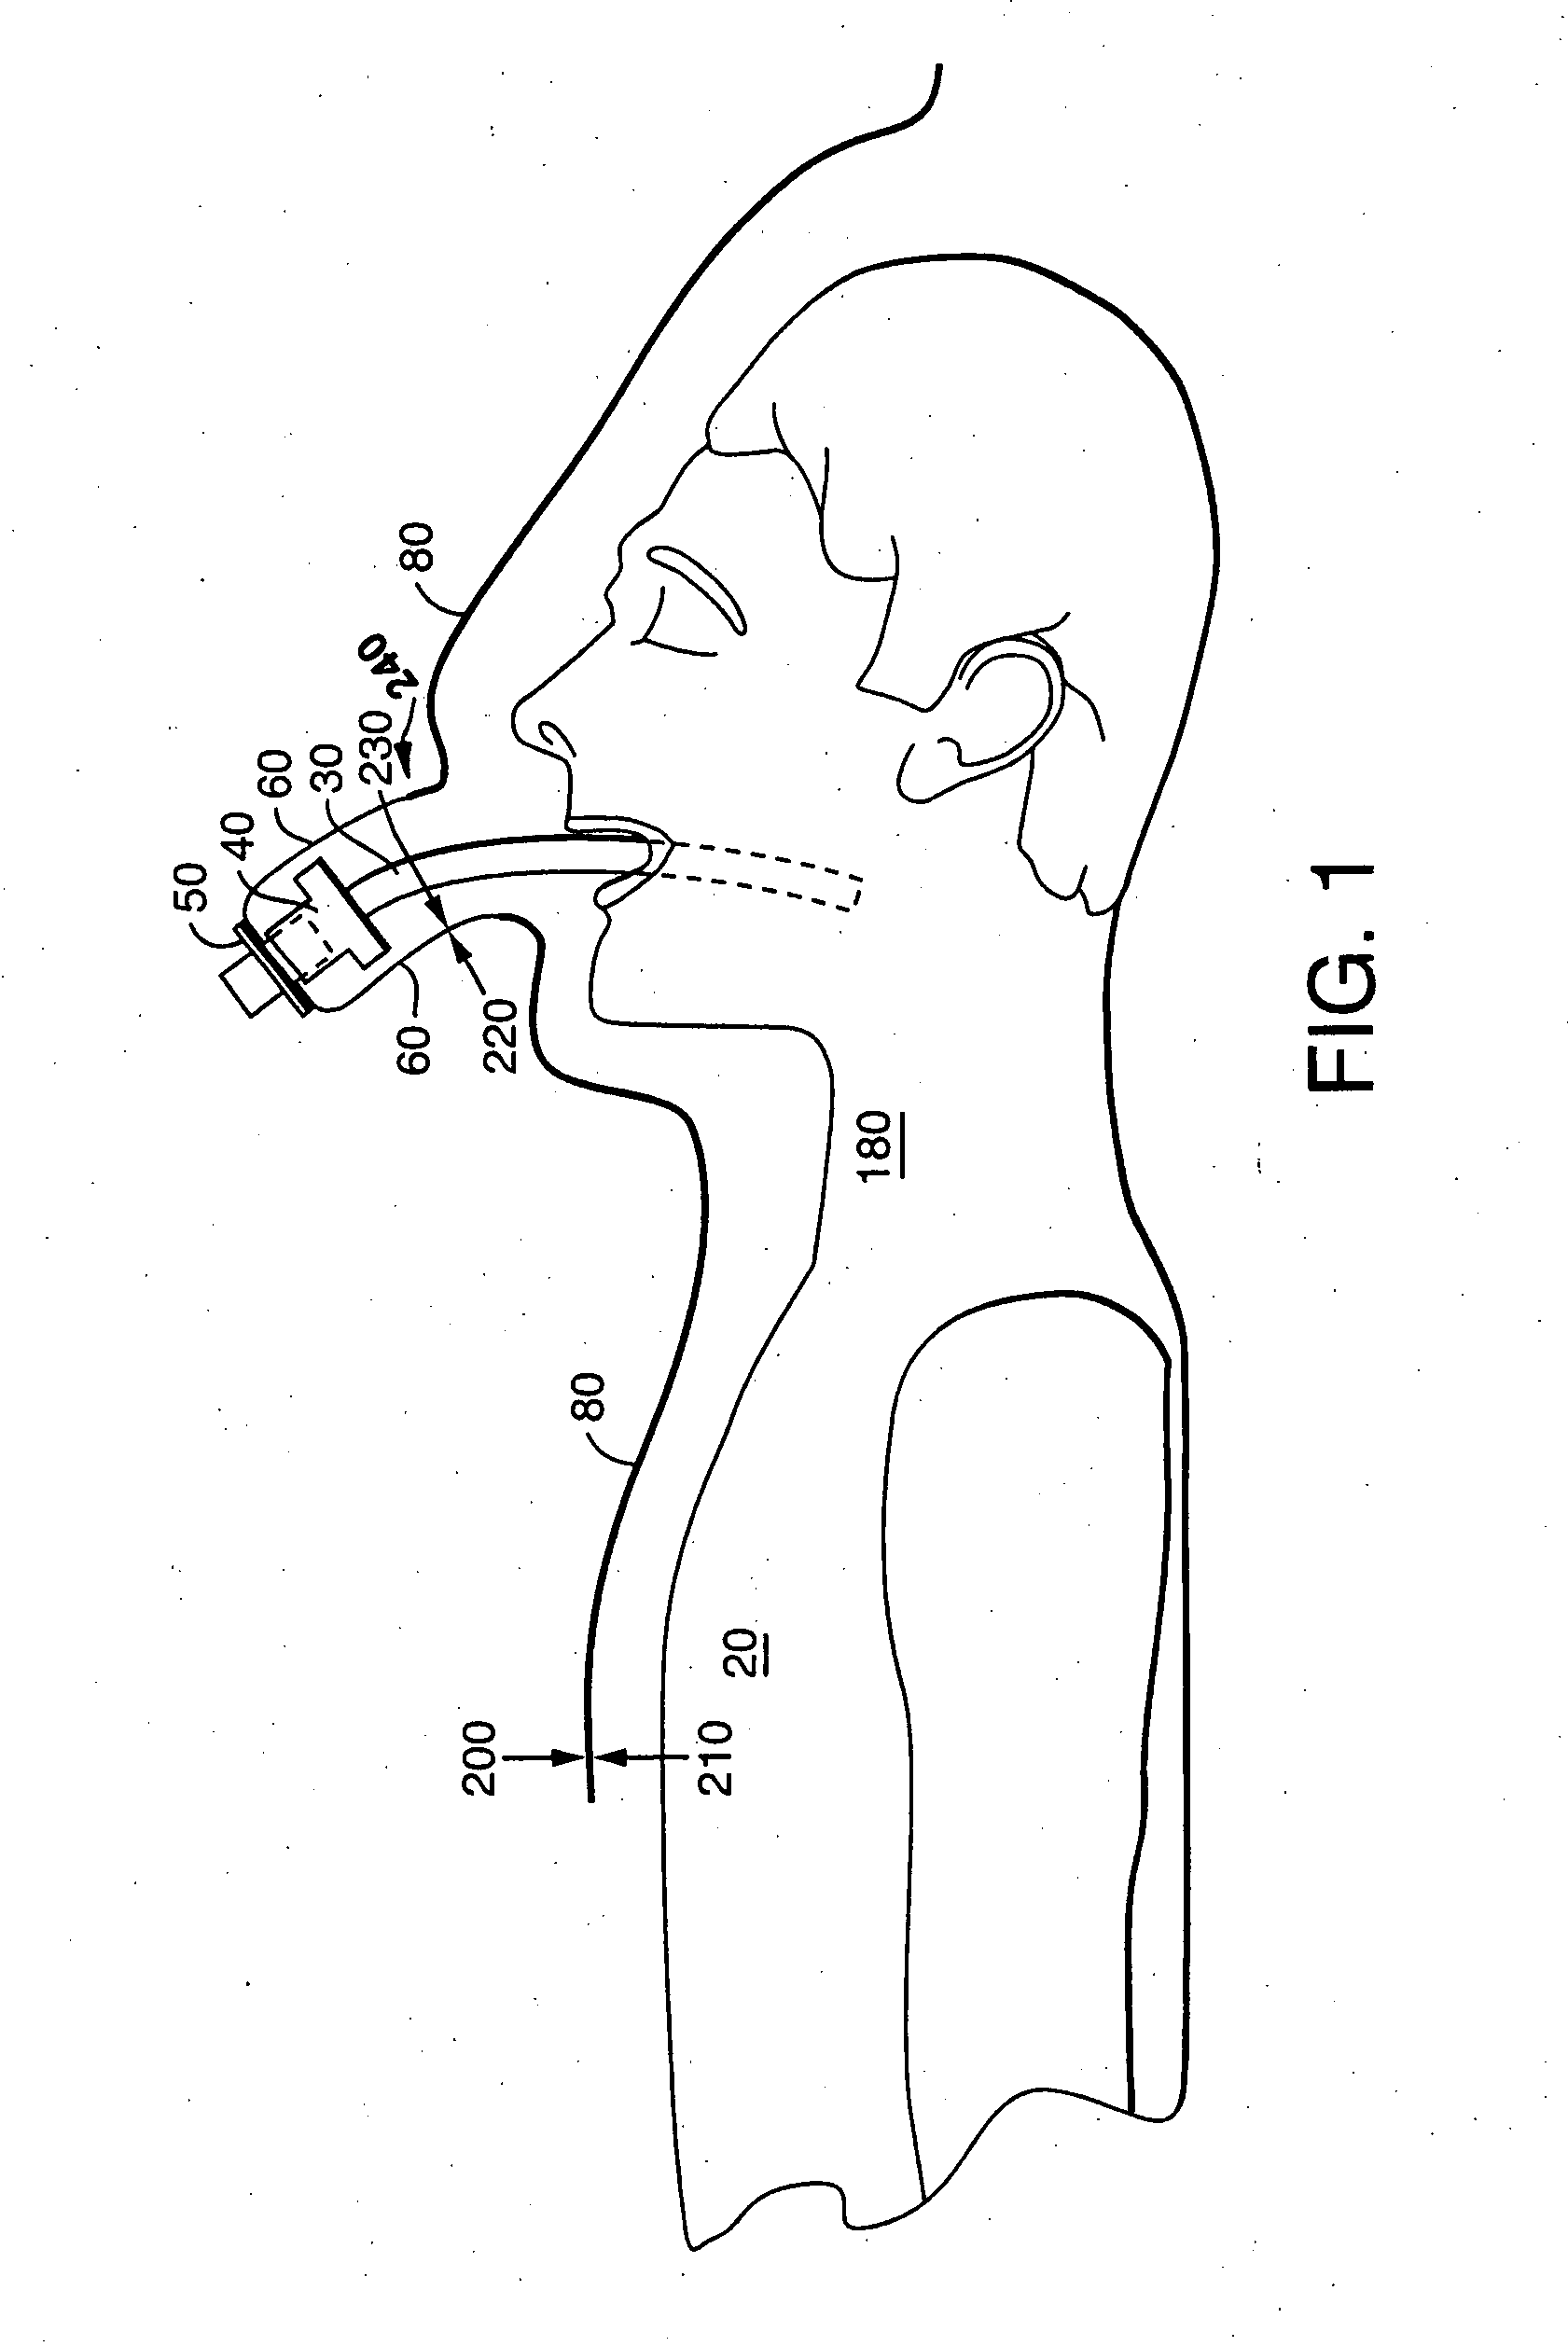 Drape for open tracheal suctioning